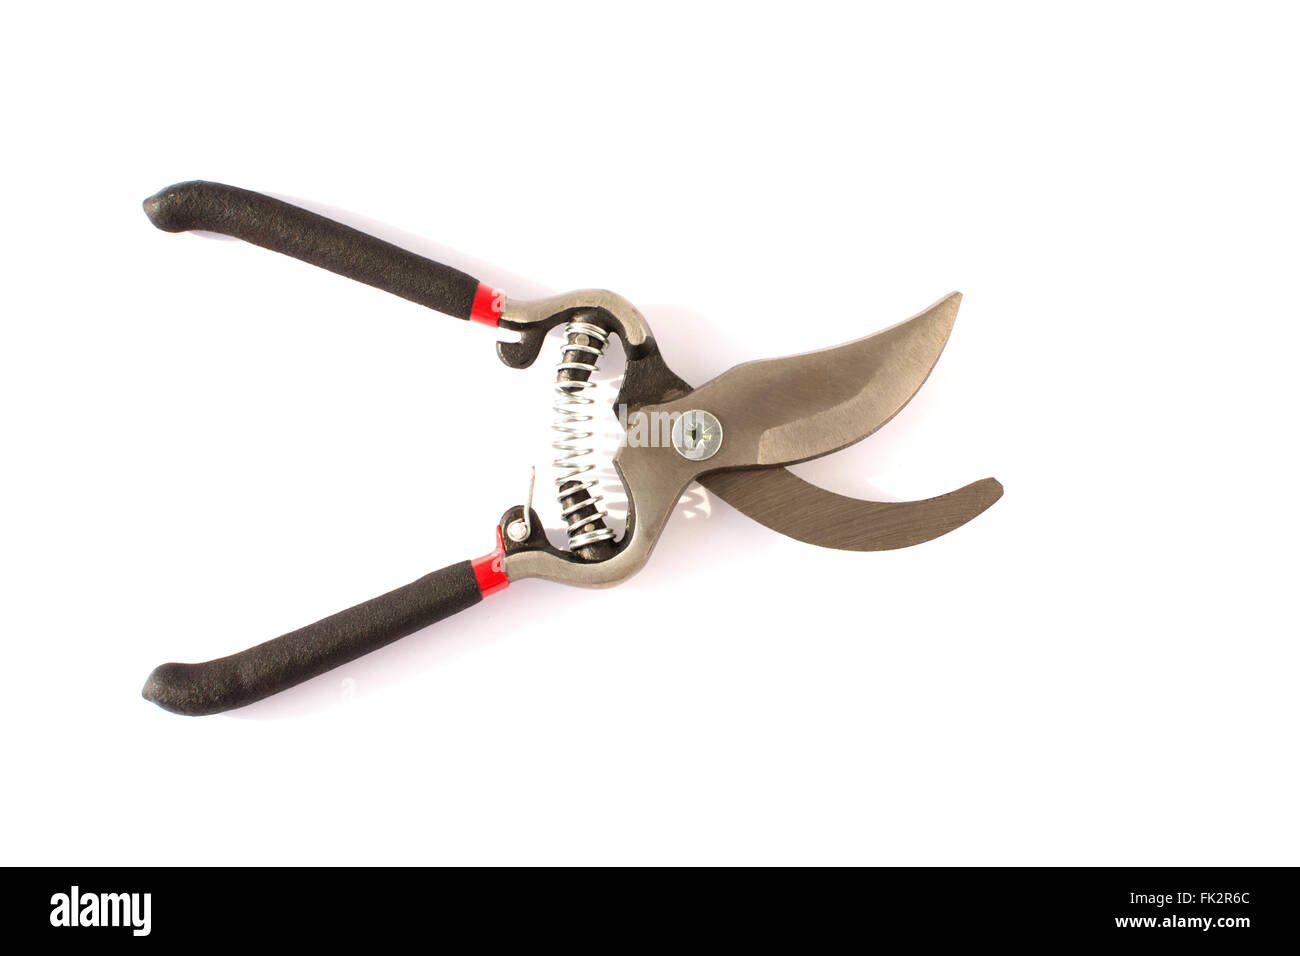 Pair of Garden Secateurs for plant trimming Stock Photo